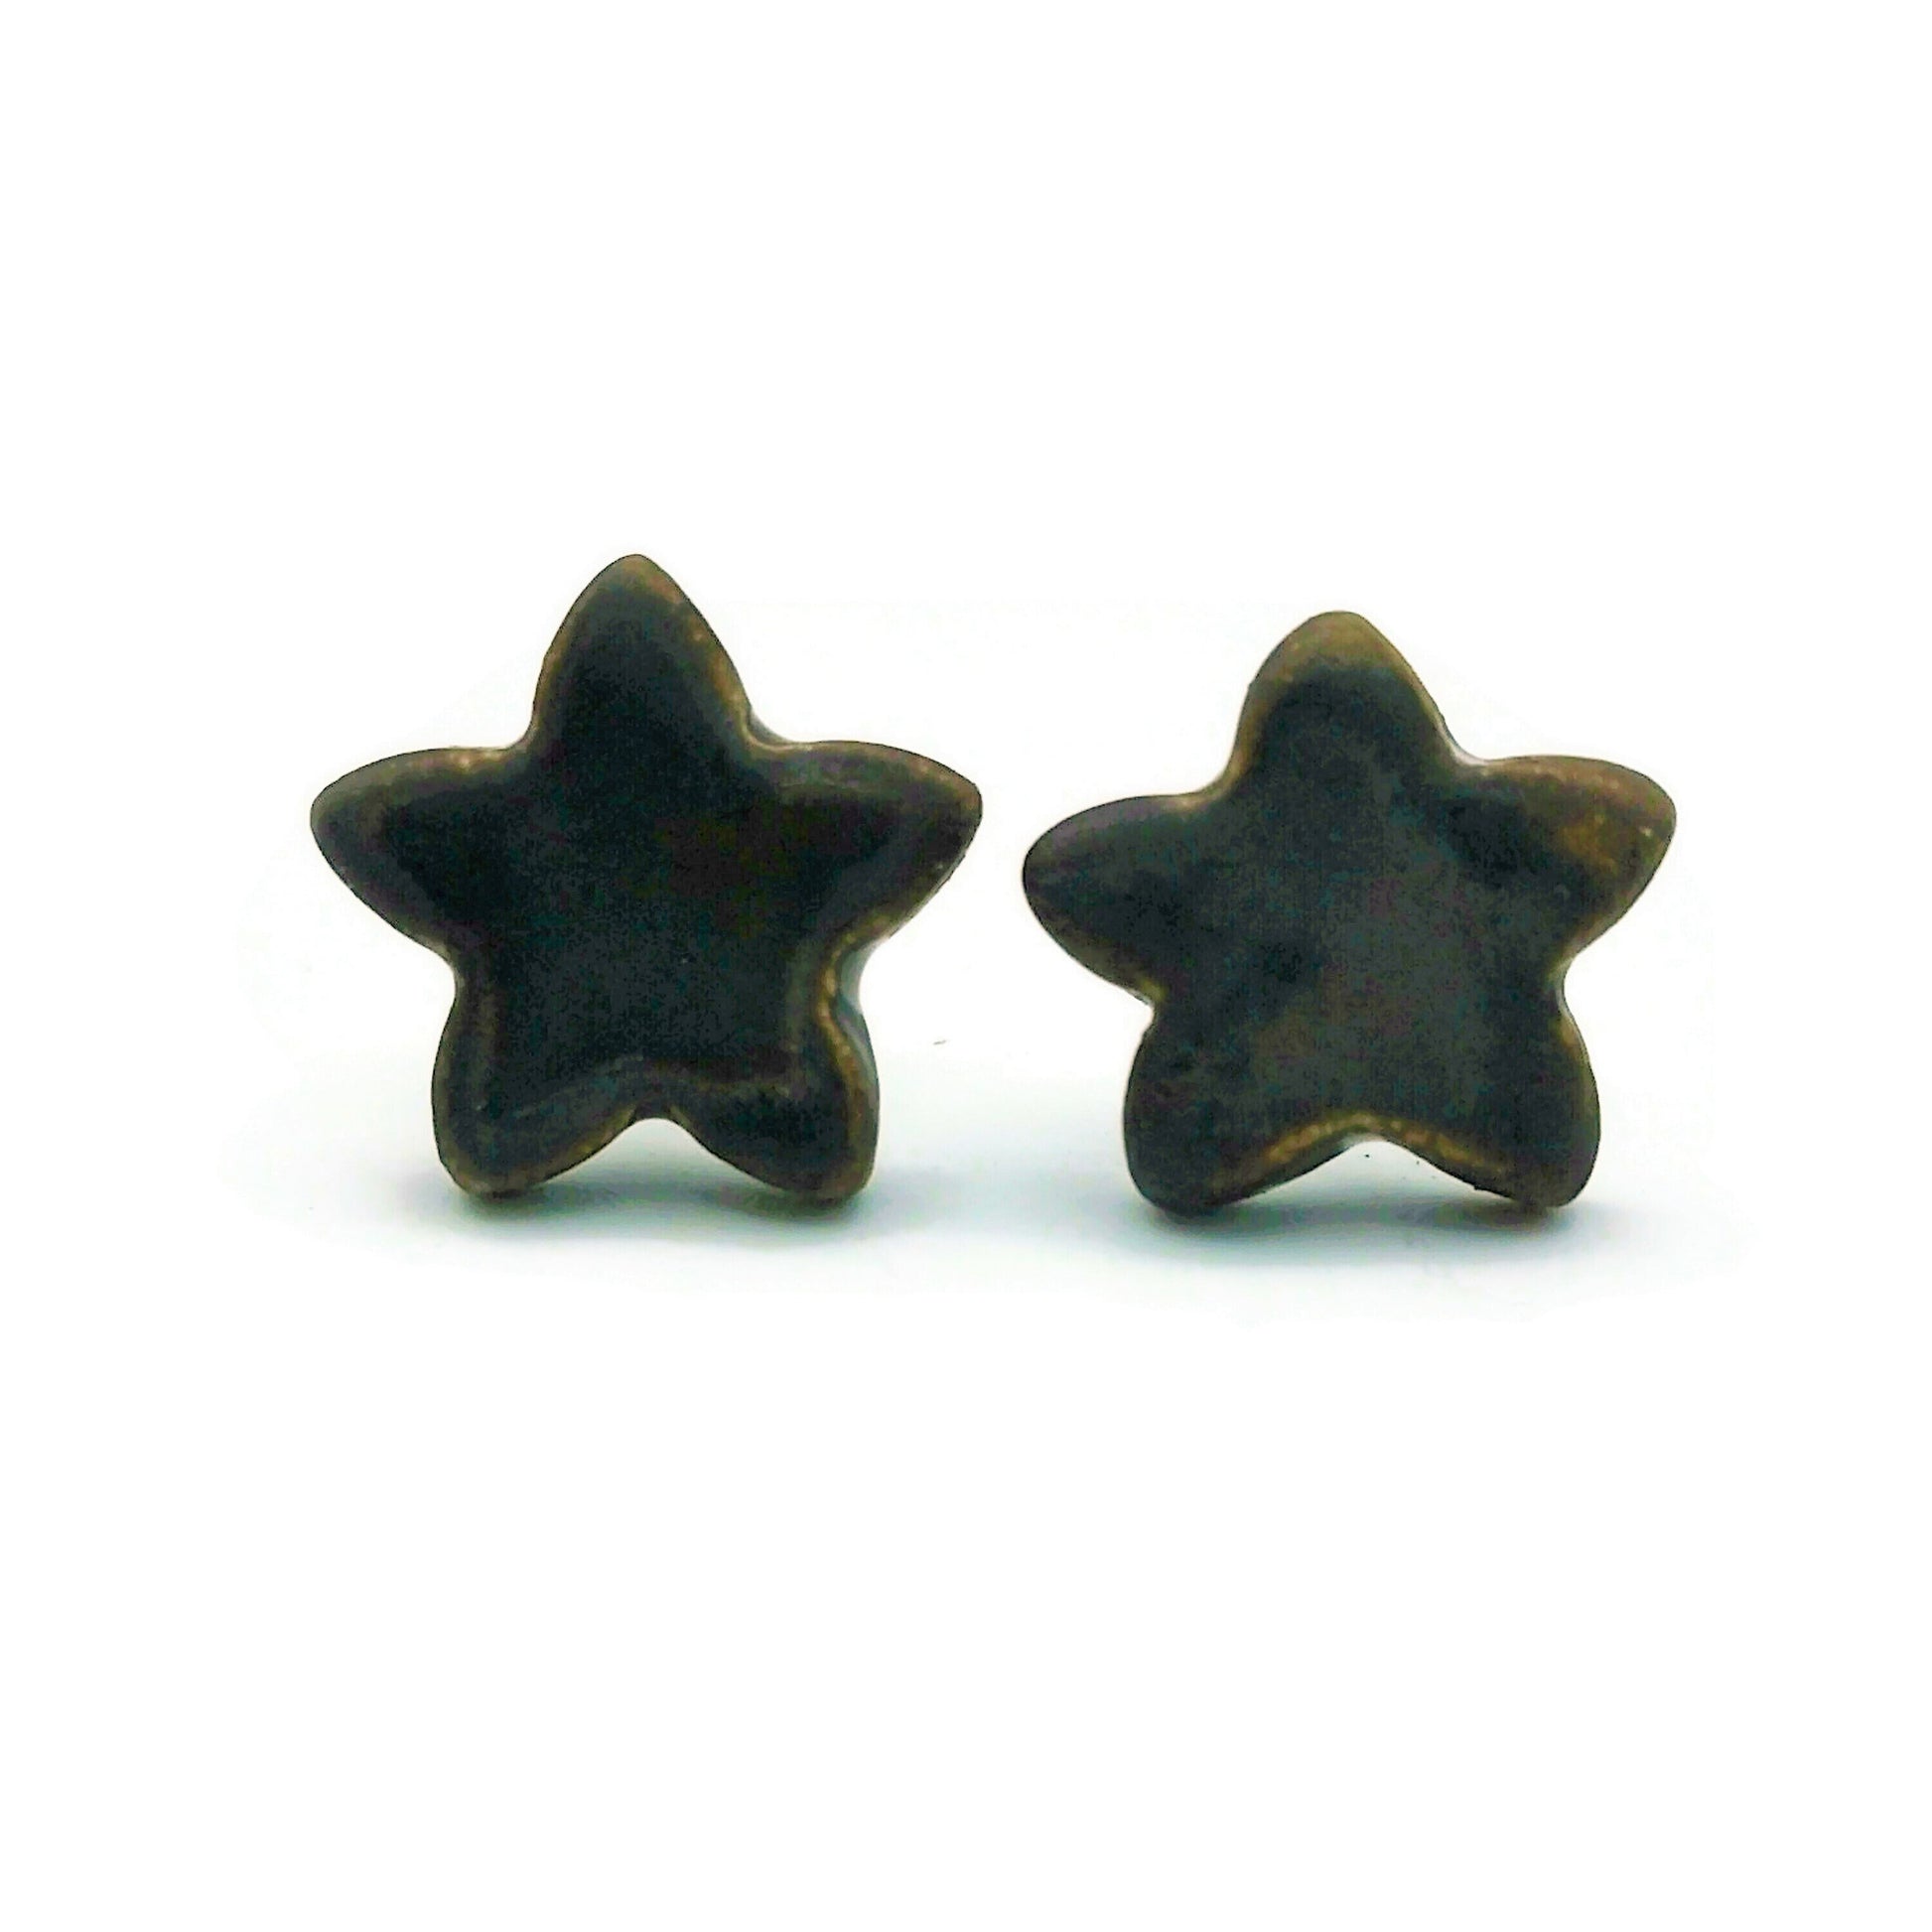 Star Stud Earrings, Geometric Earrings Studs, Clay Earrings Best Gifts For Her, Quirky Mom Birthday Gift From Daughter - Ceramica Ana Rafael